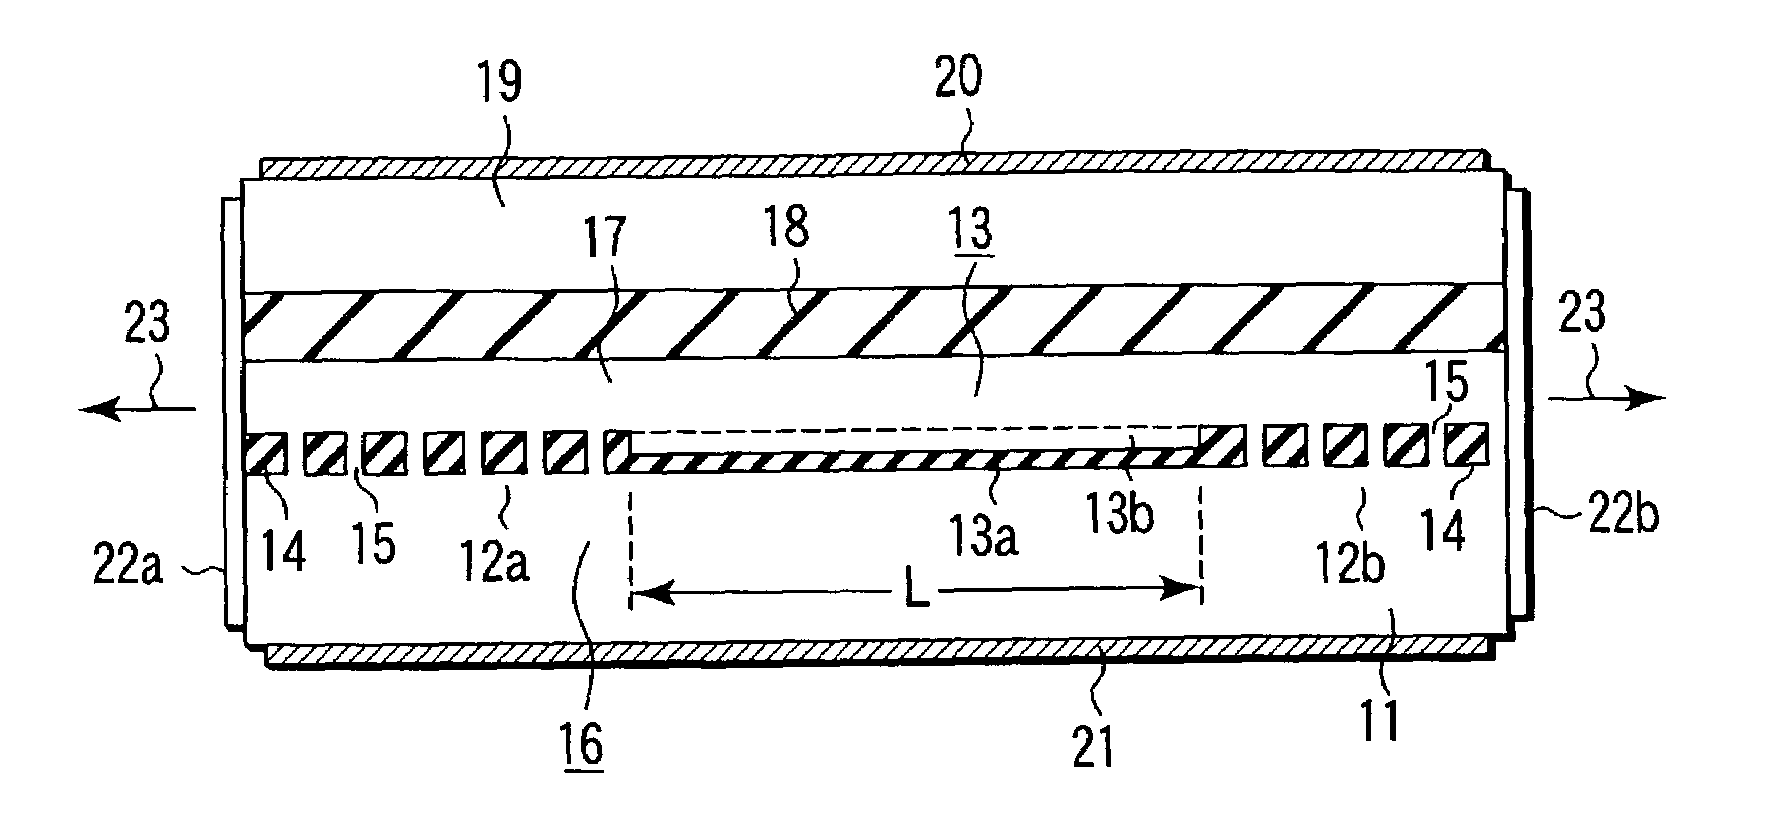 Distributed feedback semiconductor laser for outputting beam of single wavelength